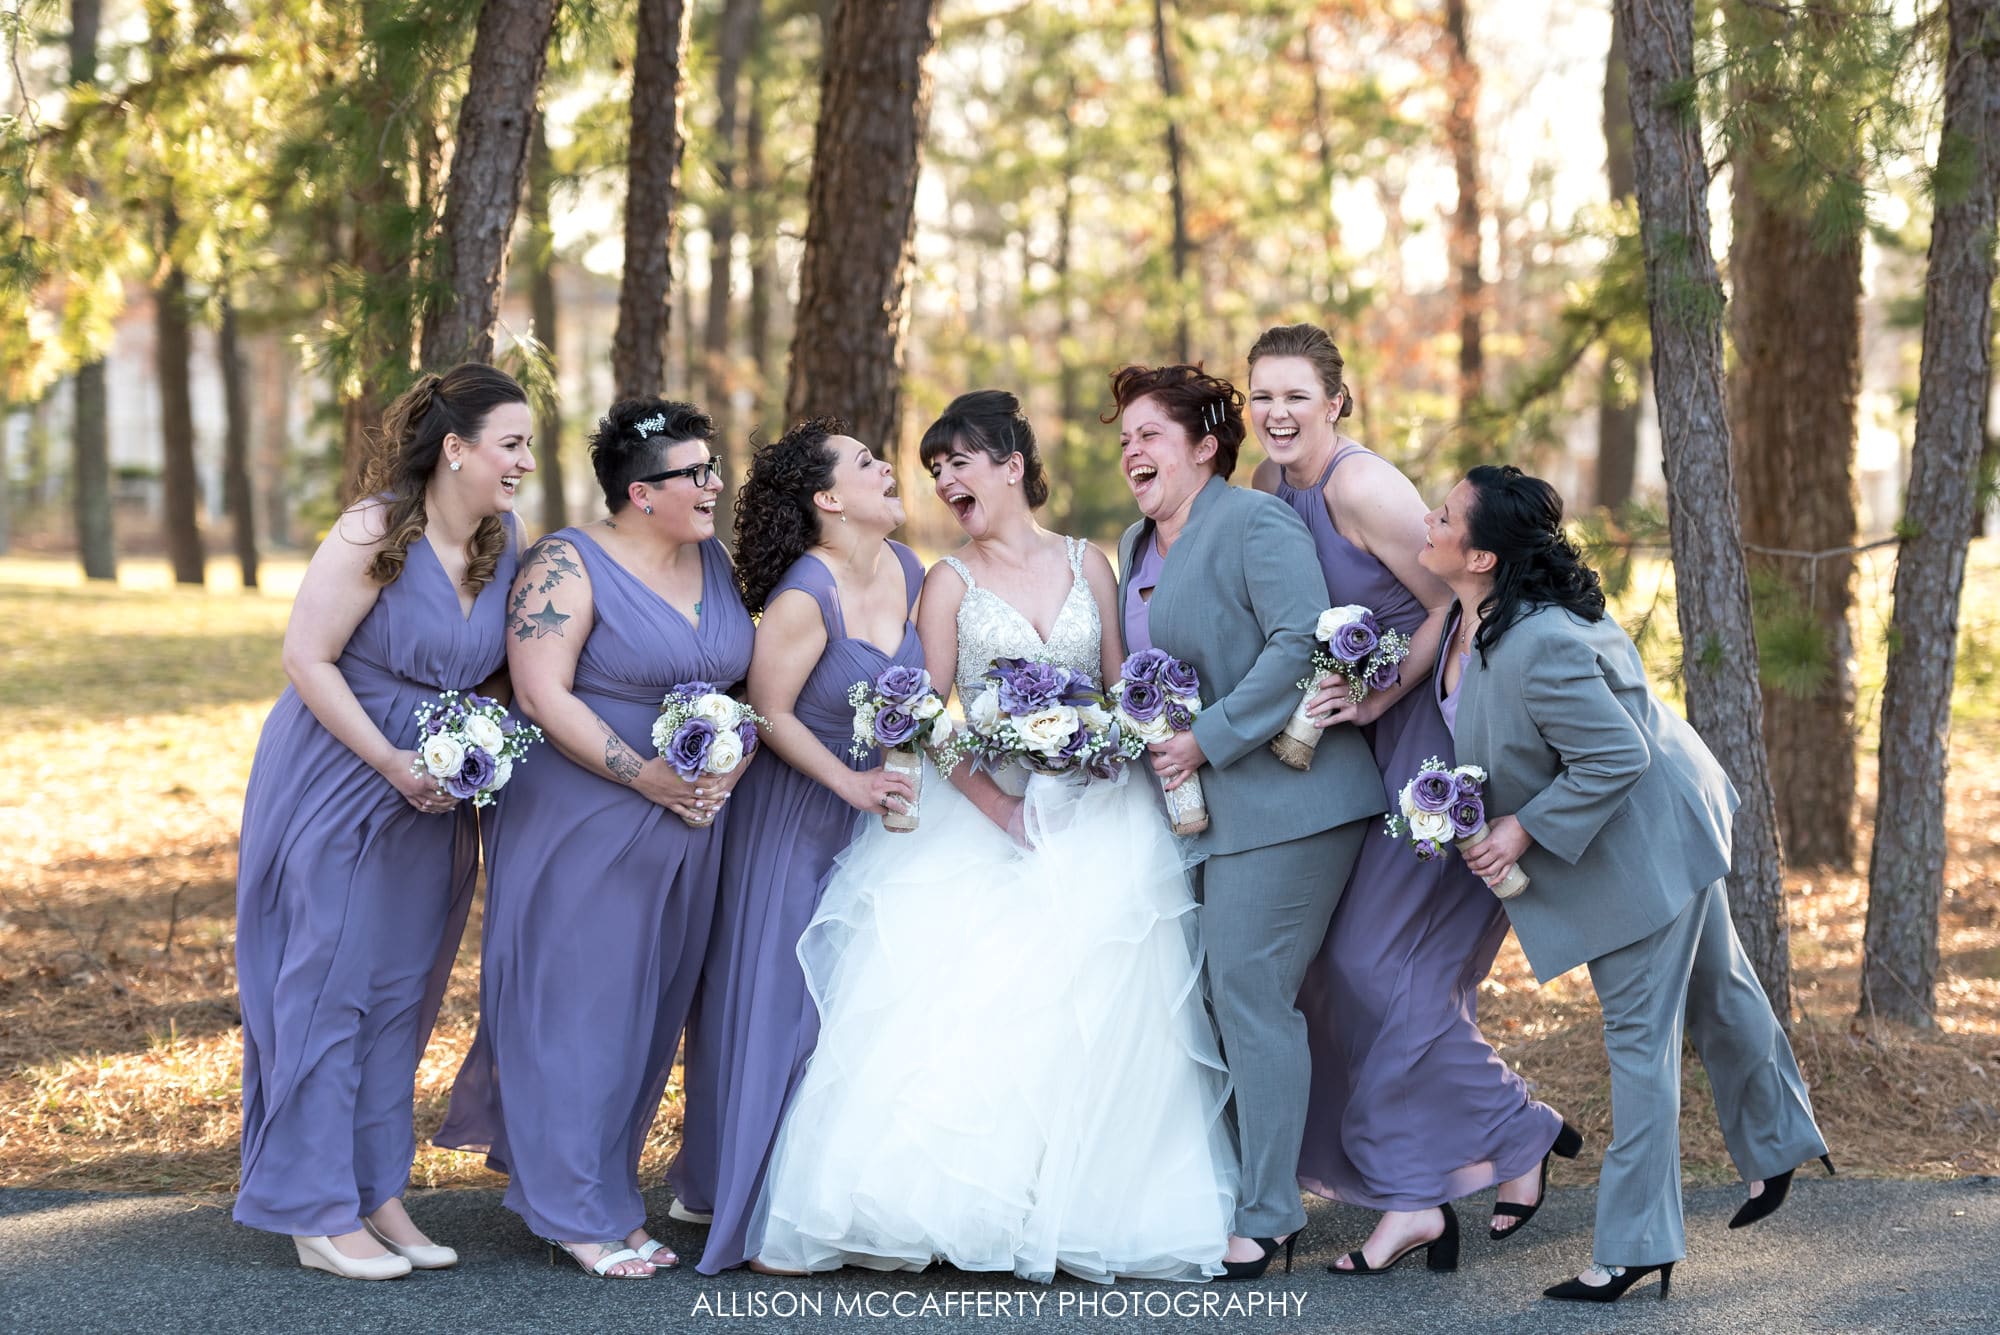 Bridemaids in purple dresses laughing with the bride